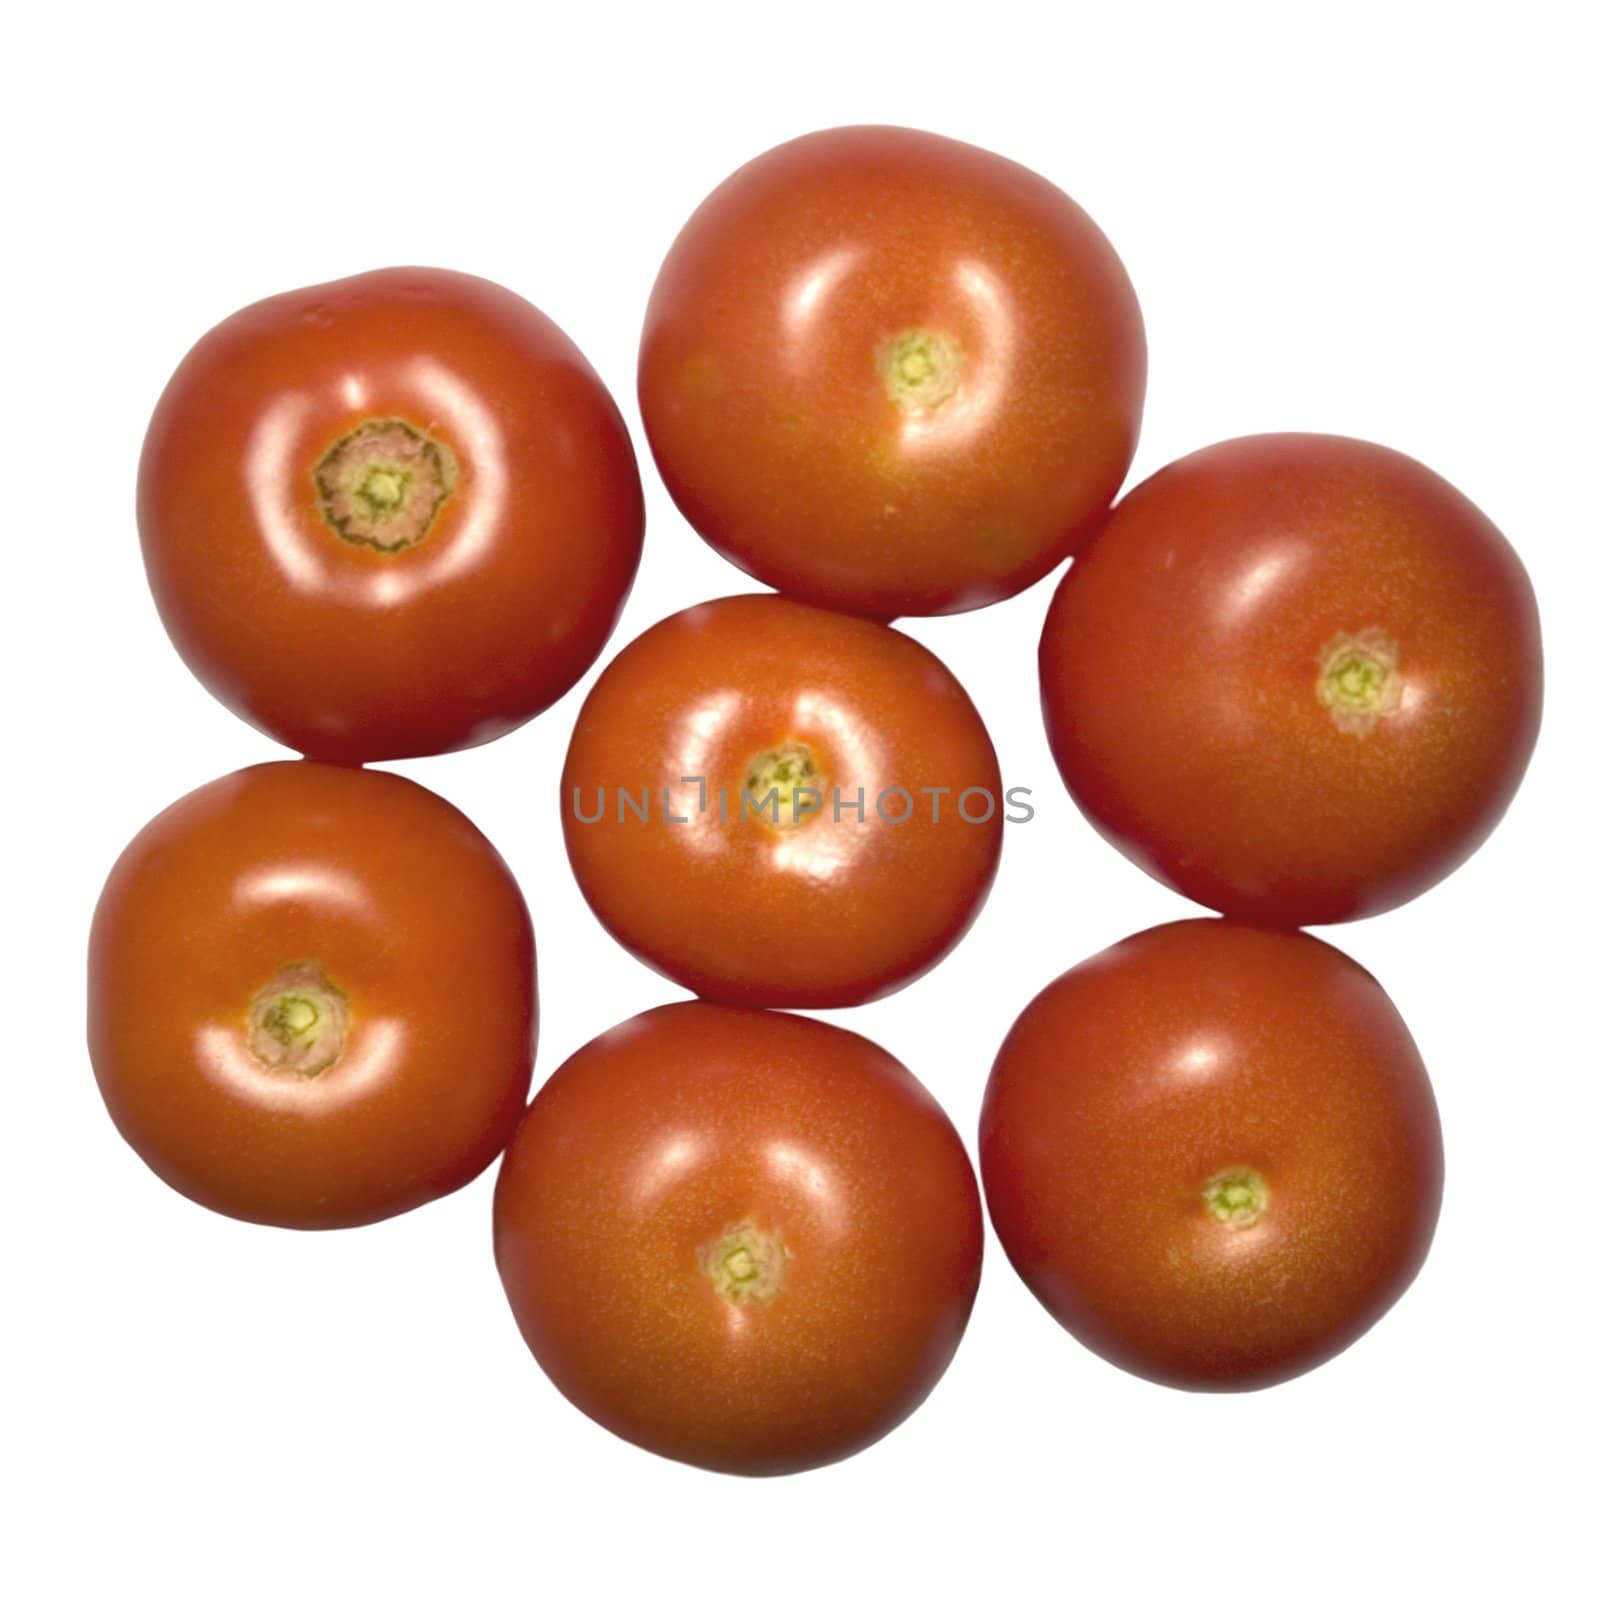 Red and fresh tomatoes undivided in a chain, seven features